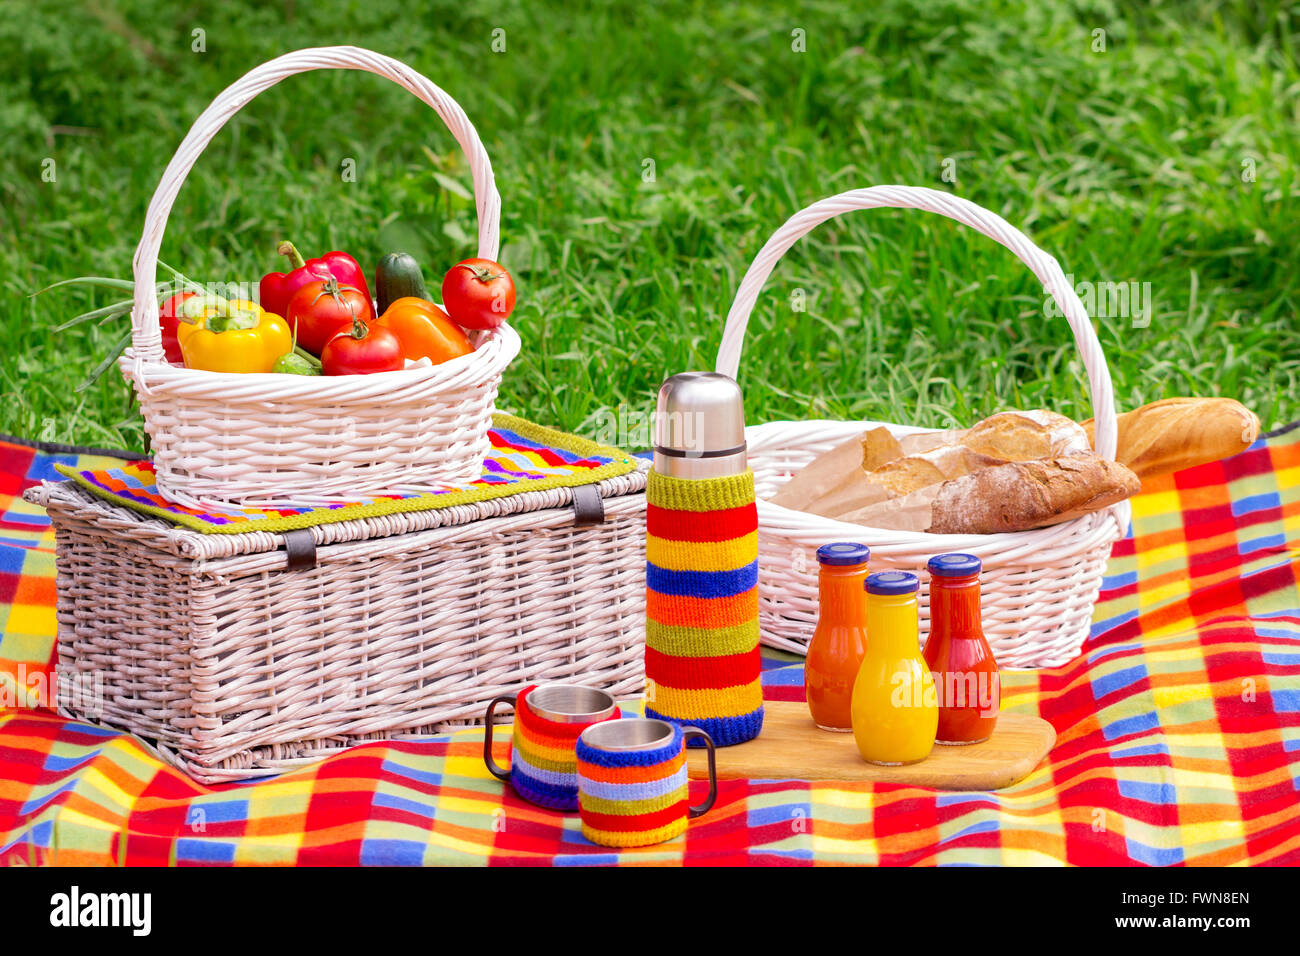 Picnic on the grass. Picnic basket with vegetables and bread. A thermos of tea and bottles of juice. Stock Photo